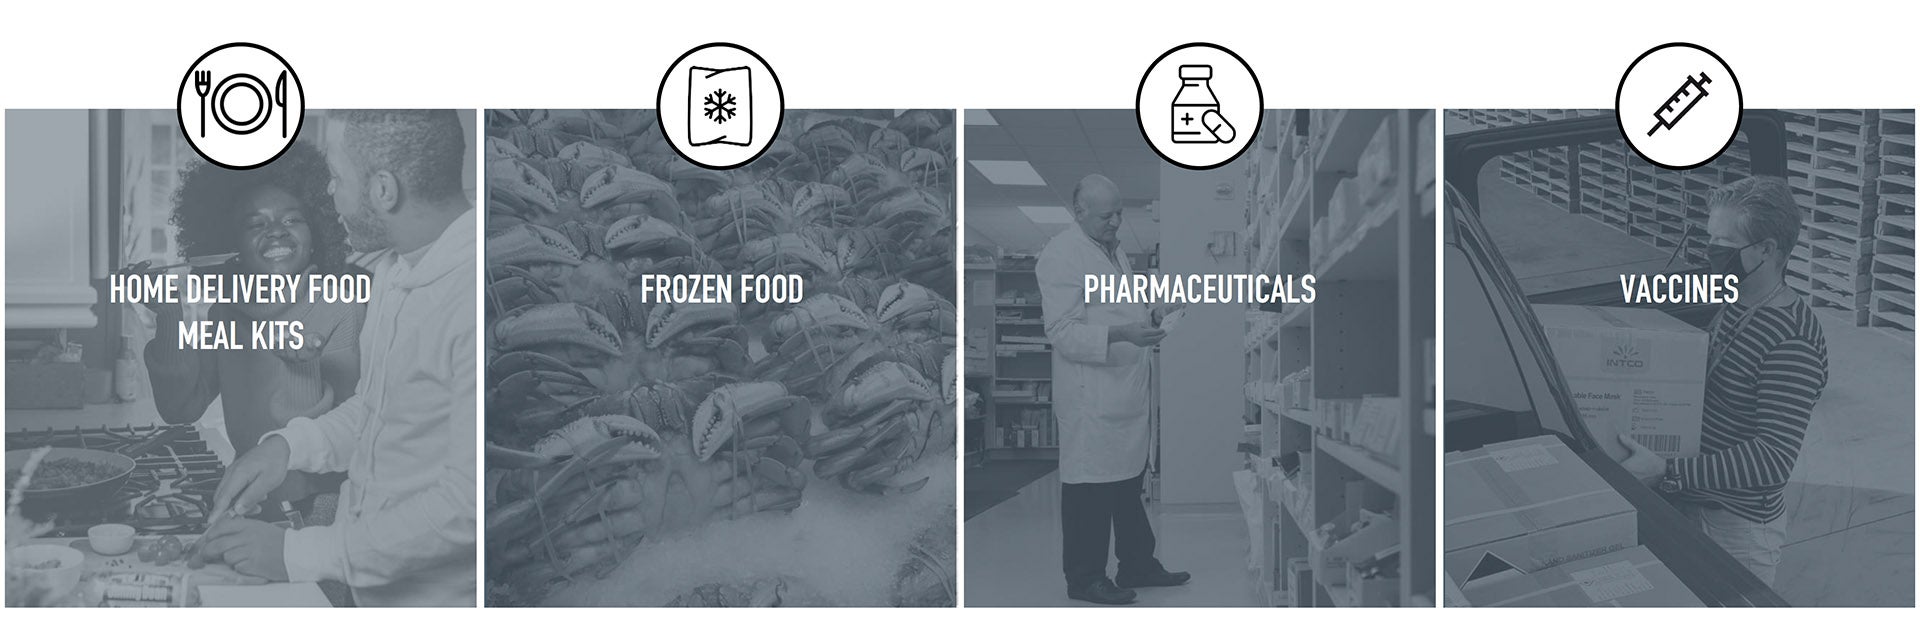 Use Cases: Home Delivery, Frozen Foods, Pharmaceuticals, and Vaccines